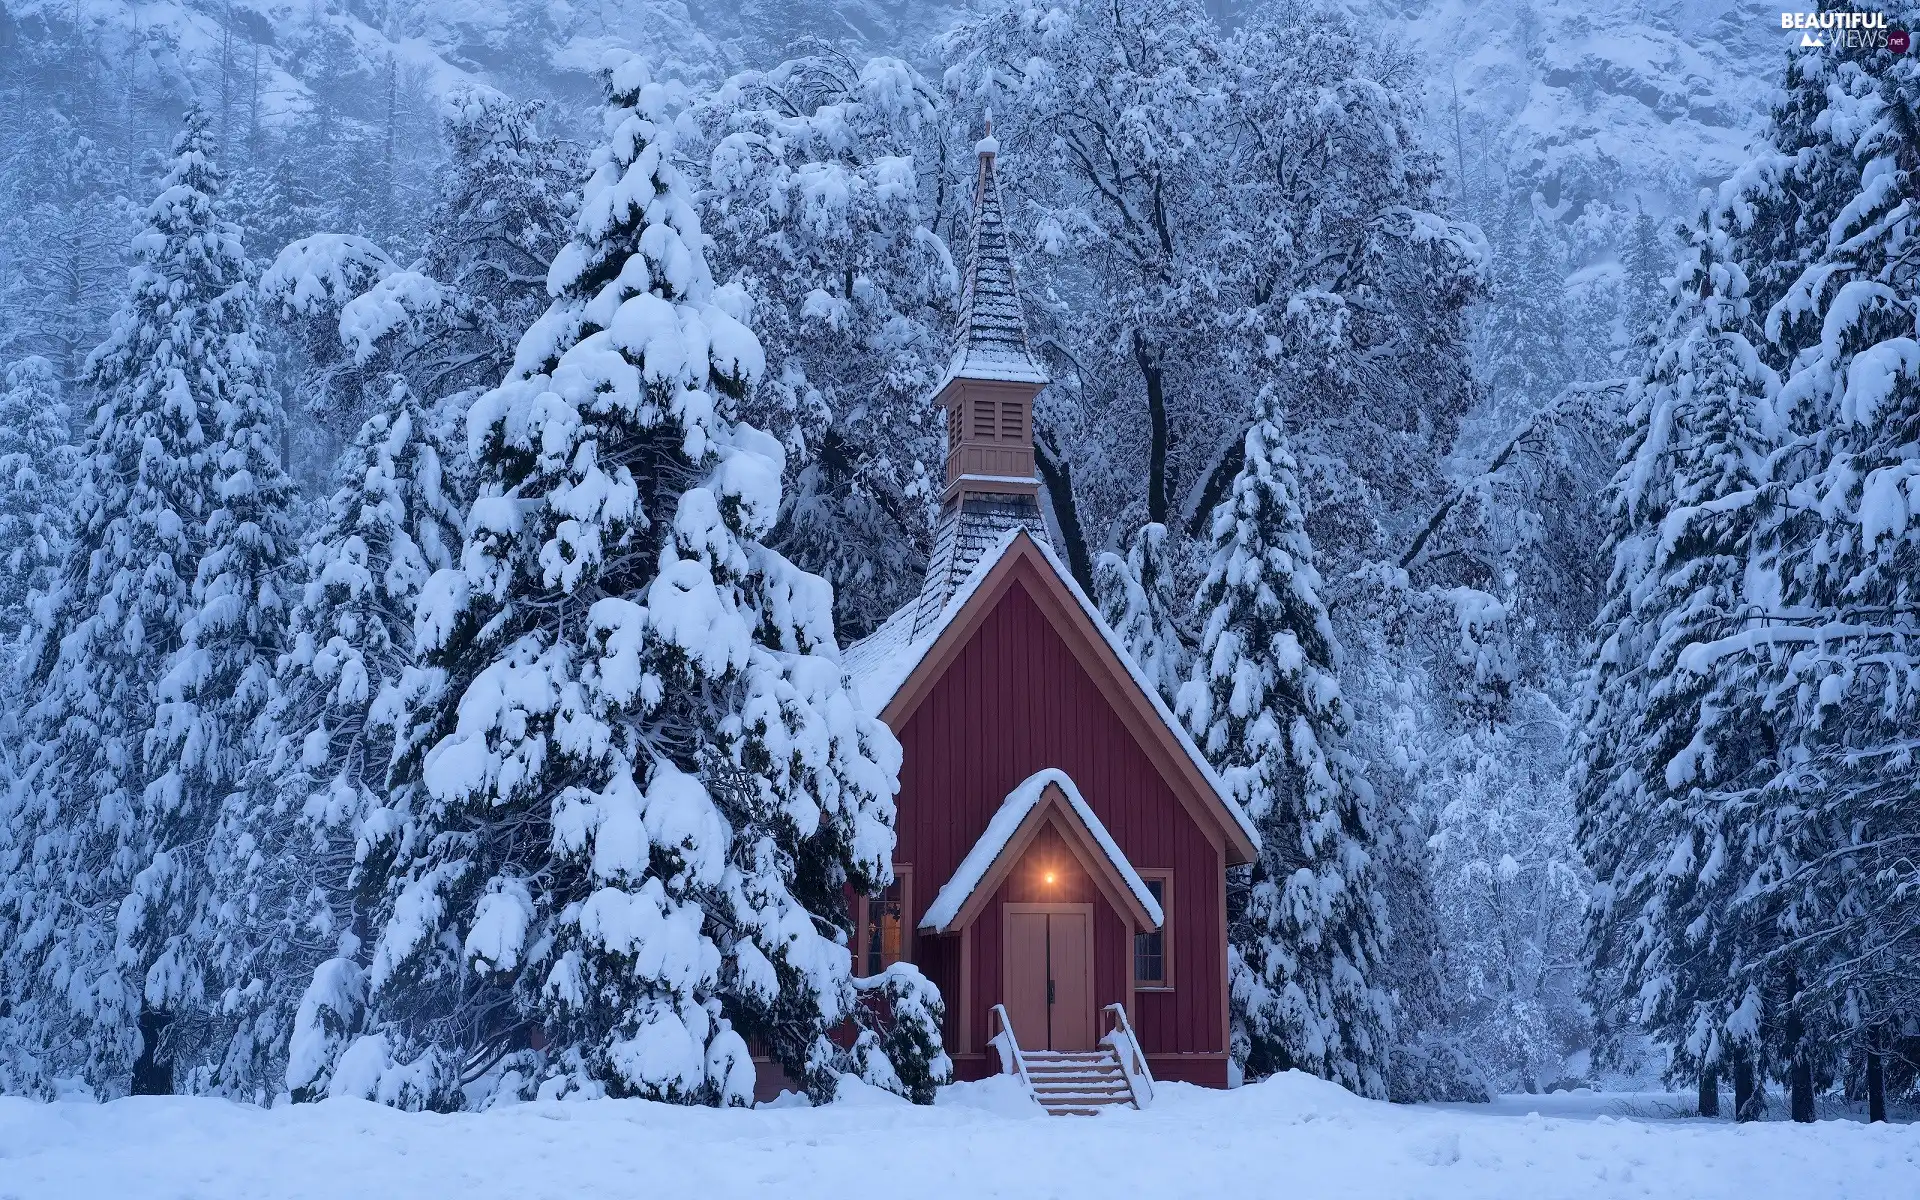 viewes, State of California, winter, church, Snowy, The United States, Yosemite National Park, forest, chapel, trees